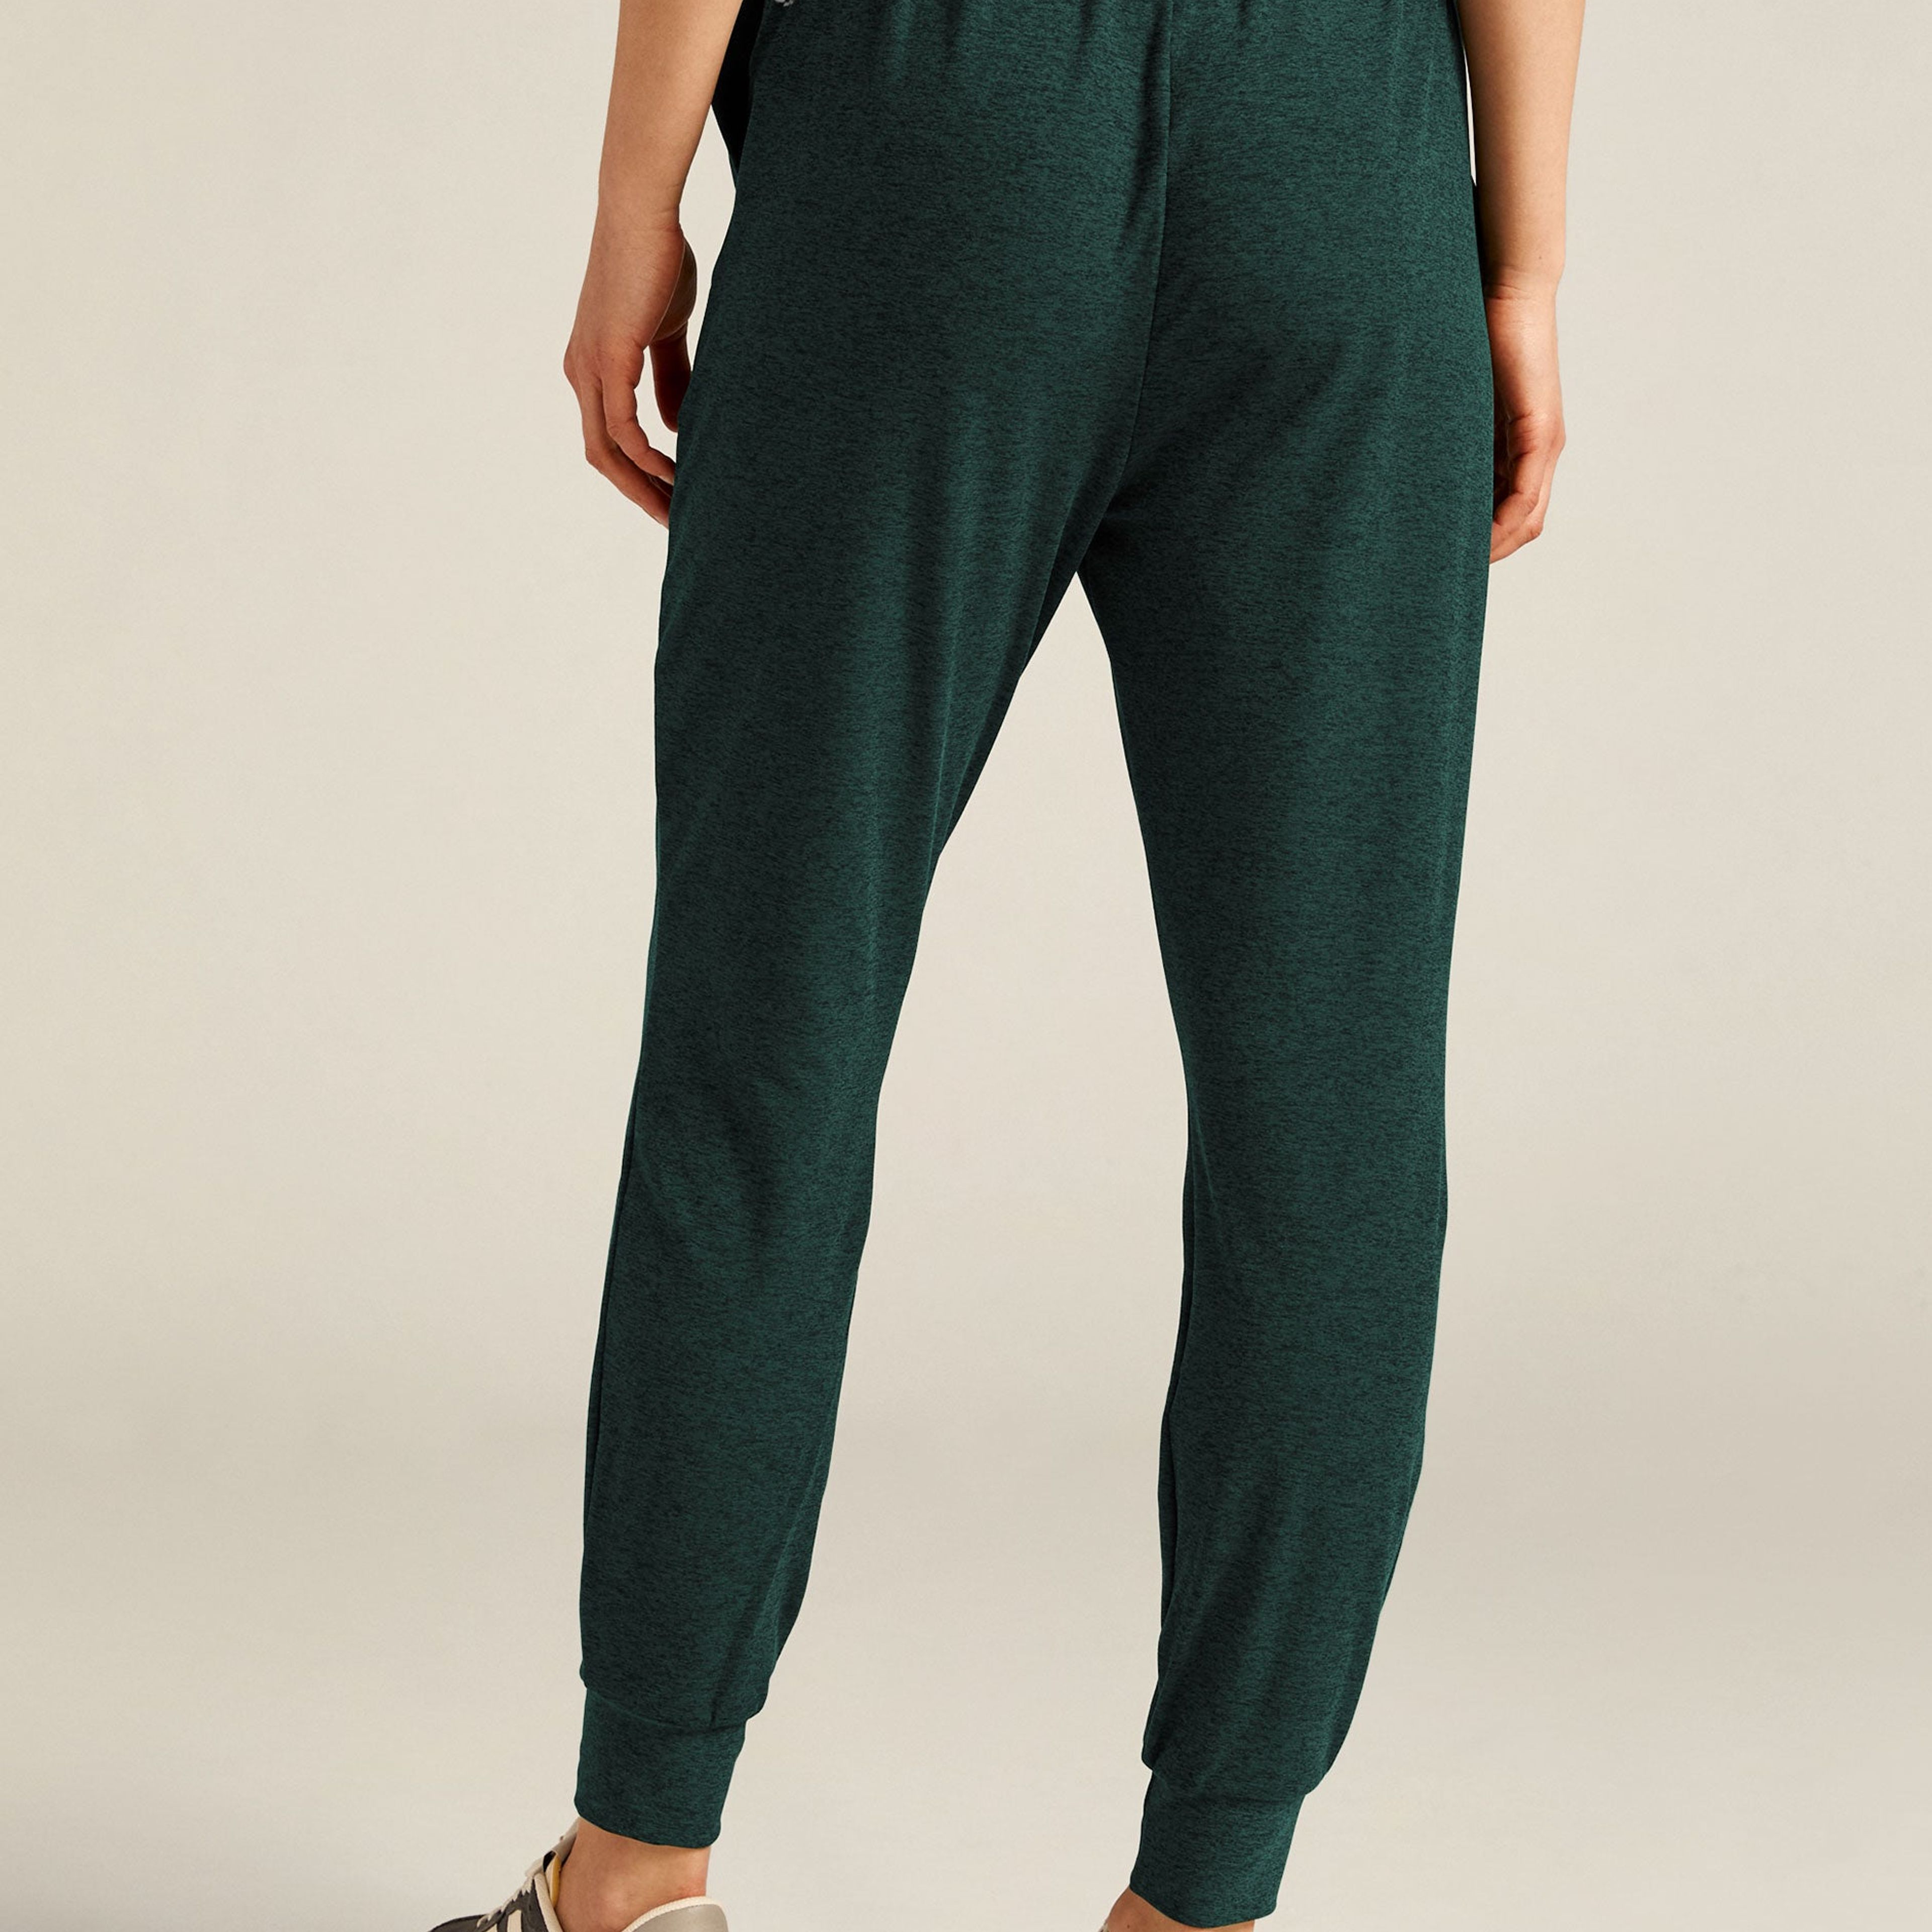 https://cdn.prod.marmalade.co/products/3840x3840/filters:quality(80)/www.beyondyoga.com%2Fproducts%2Fspacedye-commuter-midi-jogger-midnight-green-heather-sd1184%2F1697318214%2FSD1184_midnight-green-heather_0539.jpg